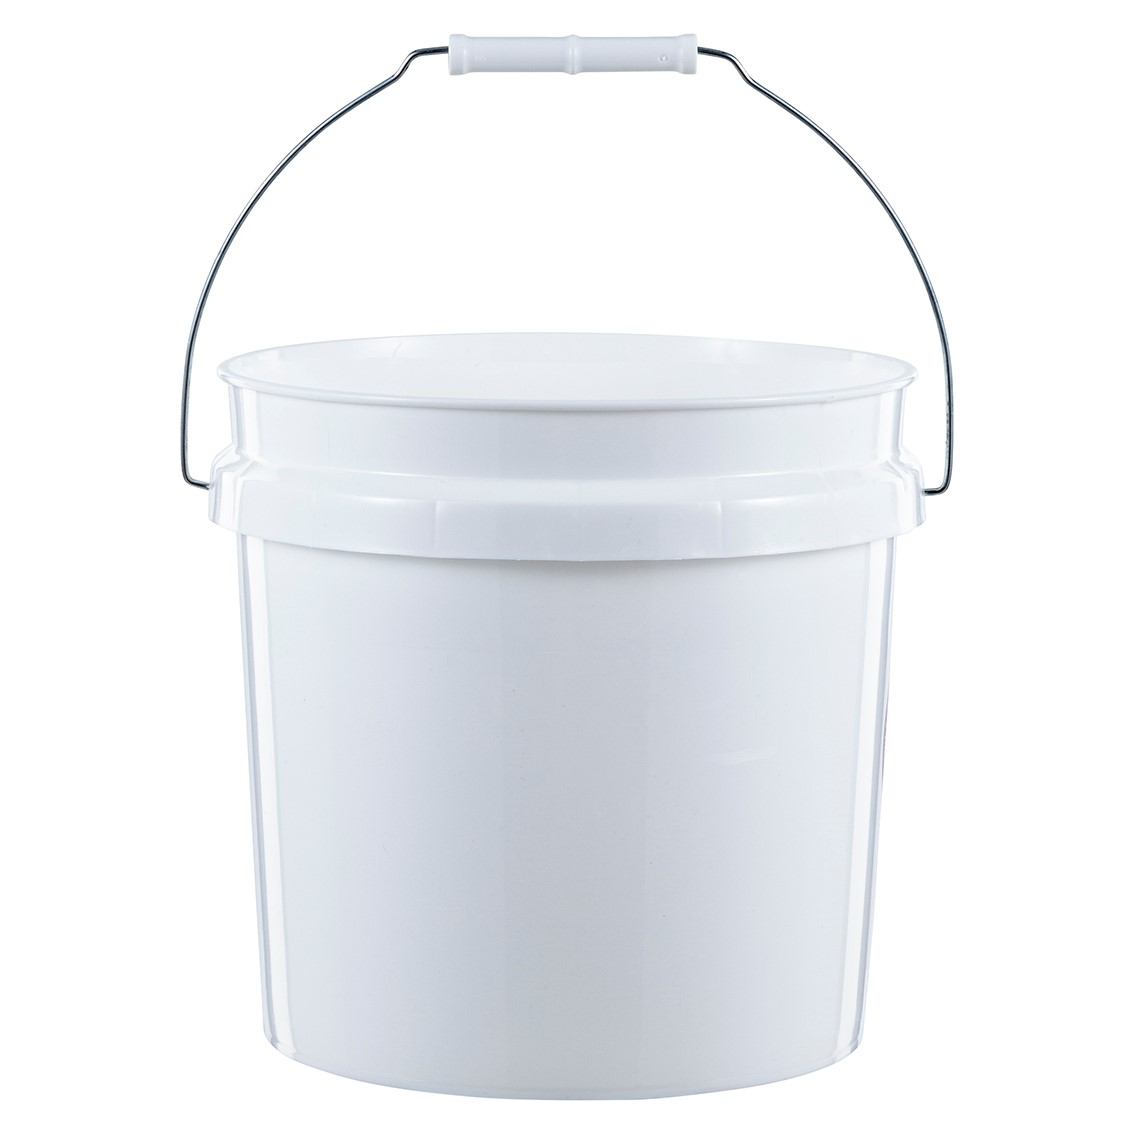 Paint & Work Buckets - United Solutions Inc.